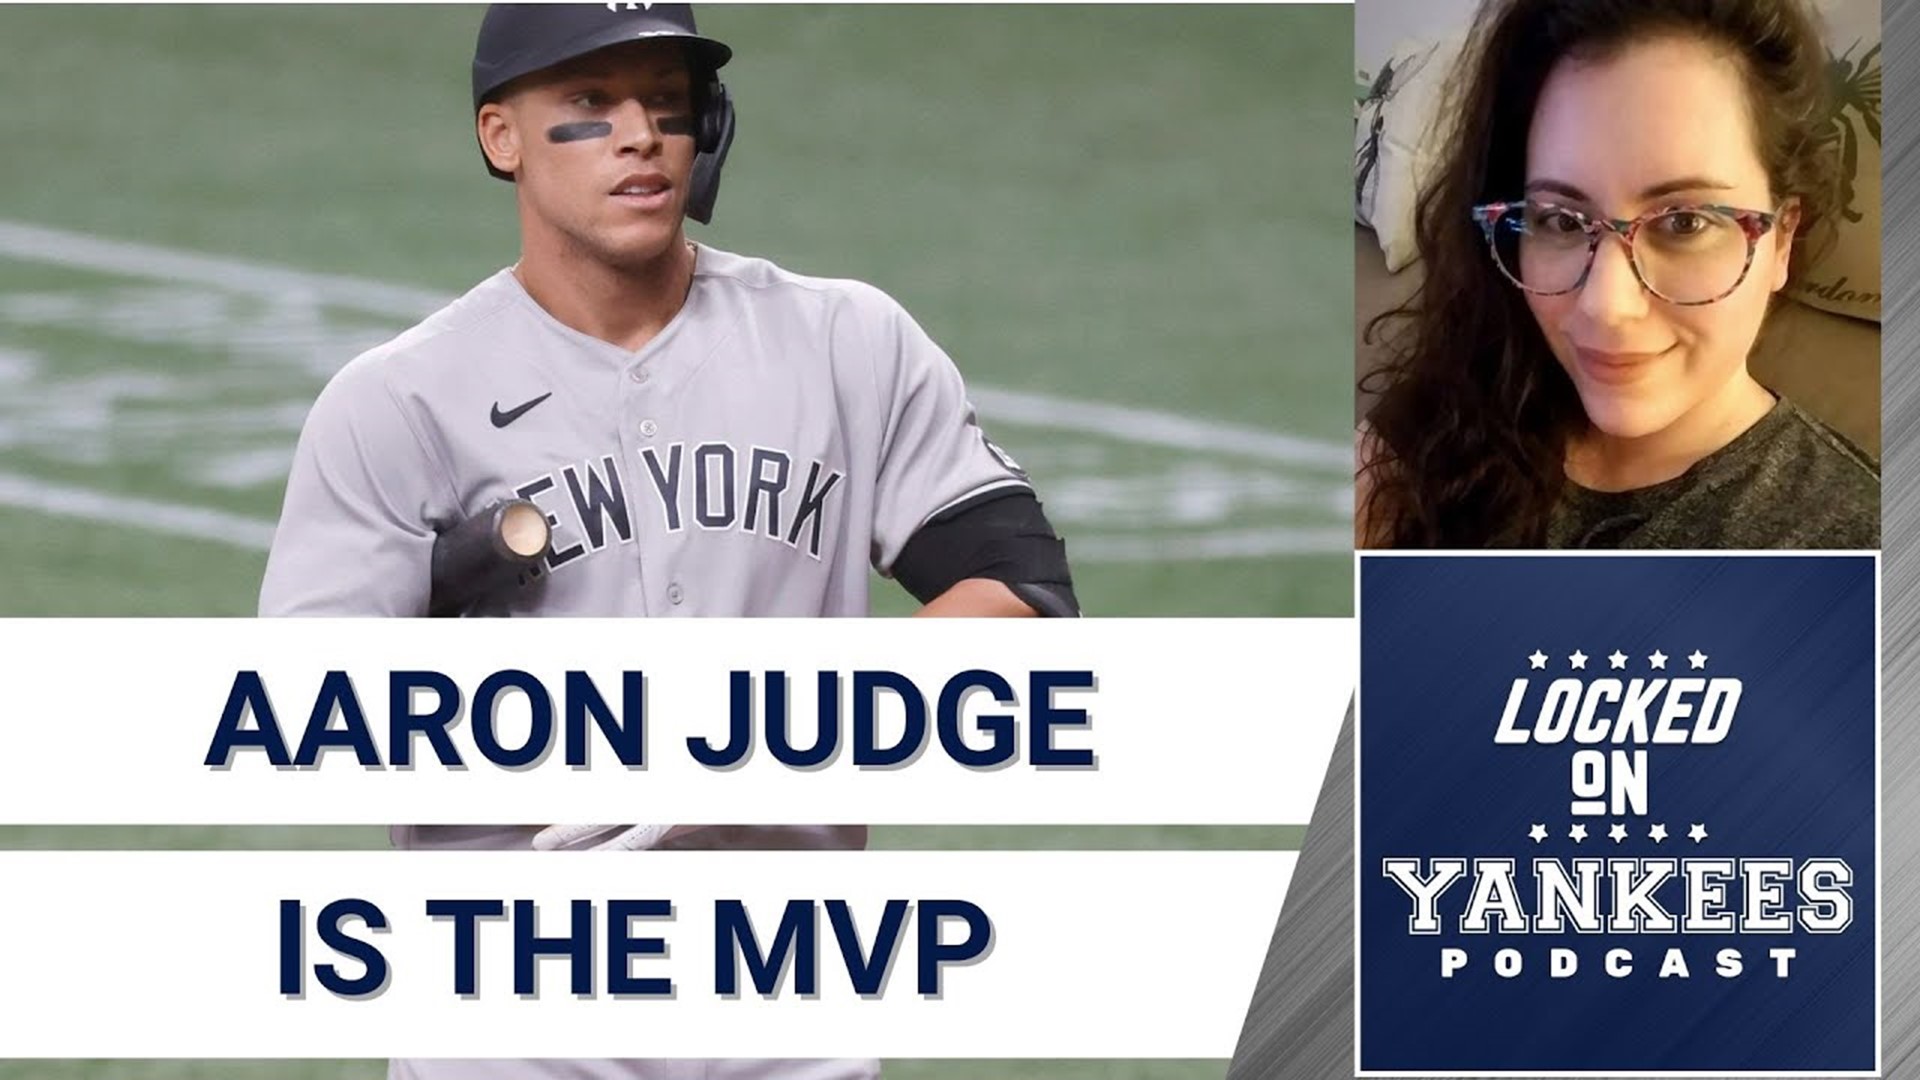 Stacey discusses Judge's amazing 2022 campaign, goes through the numbers, and even some splits to show just how bonkers his season is.